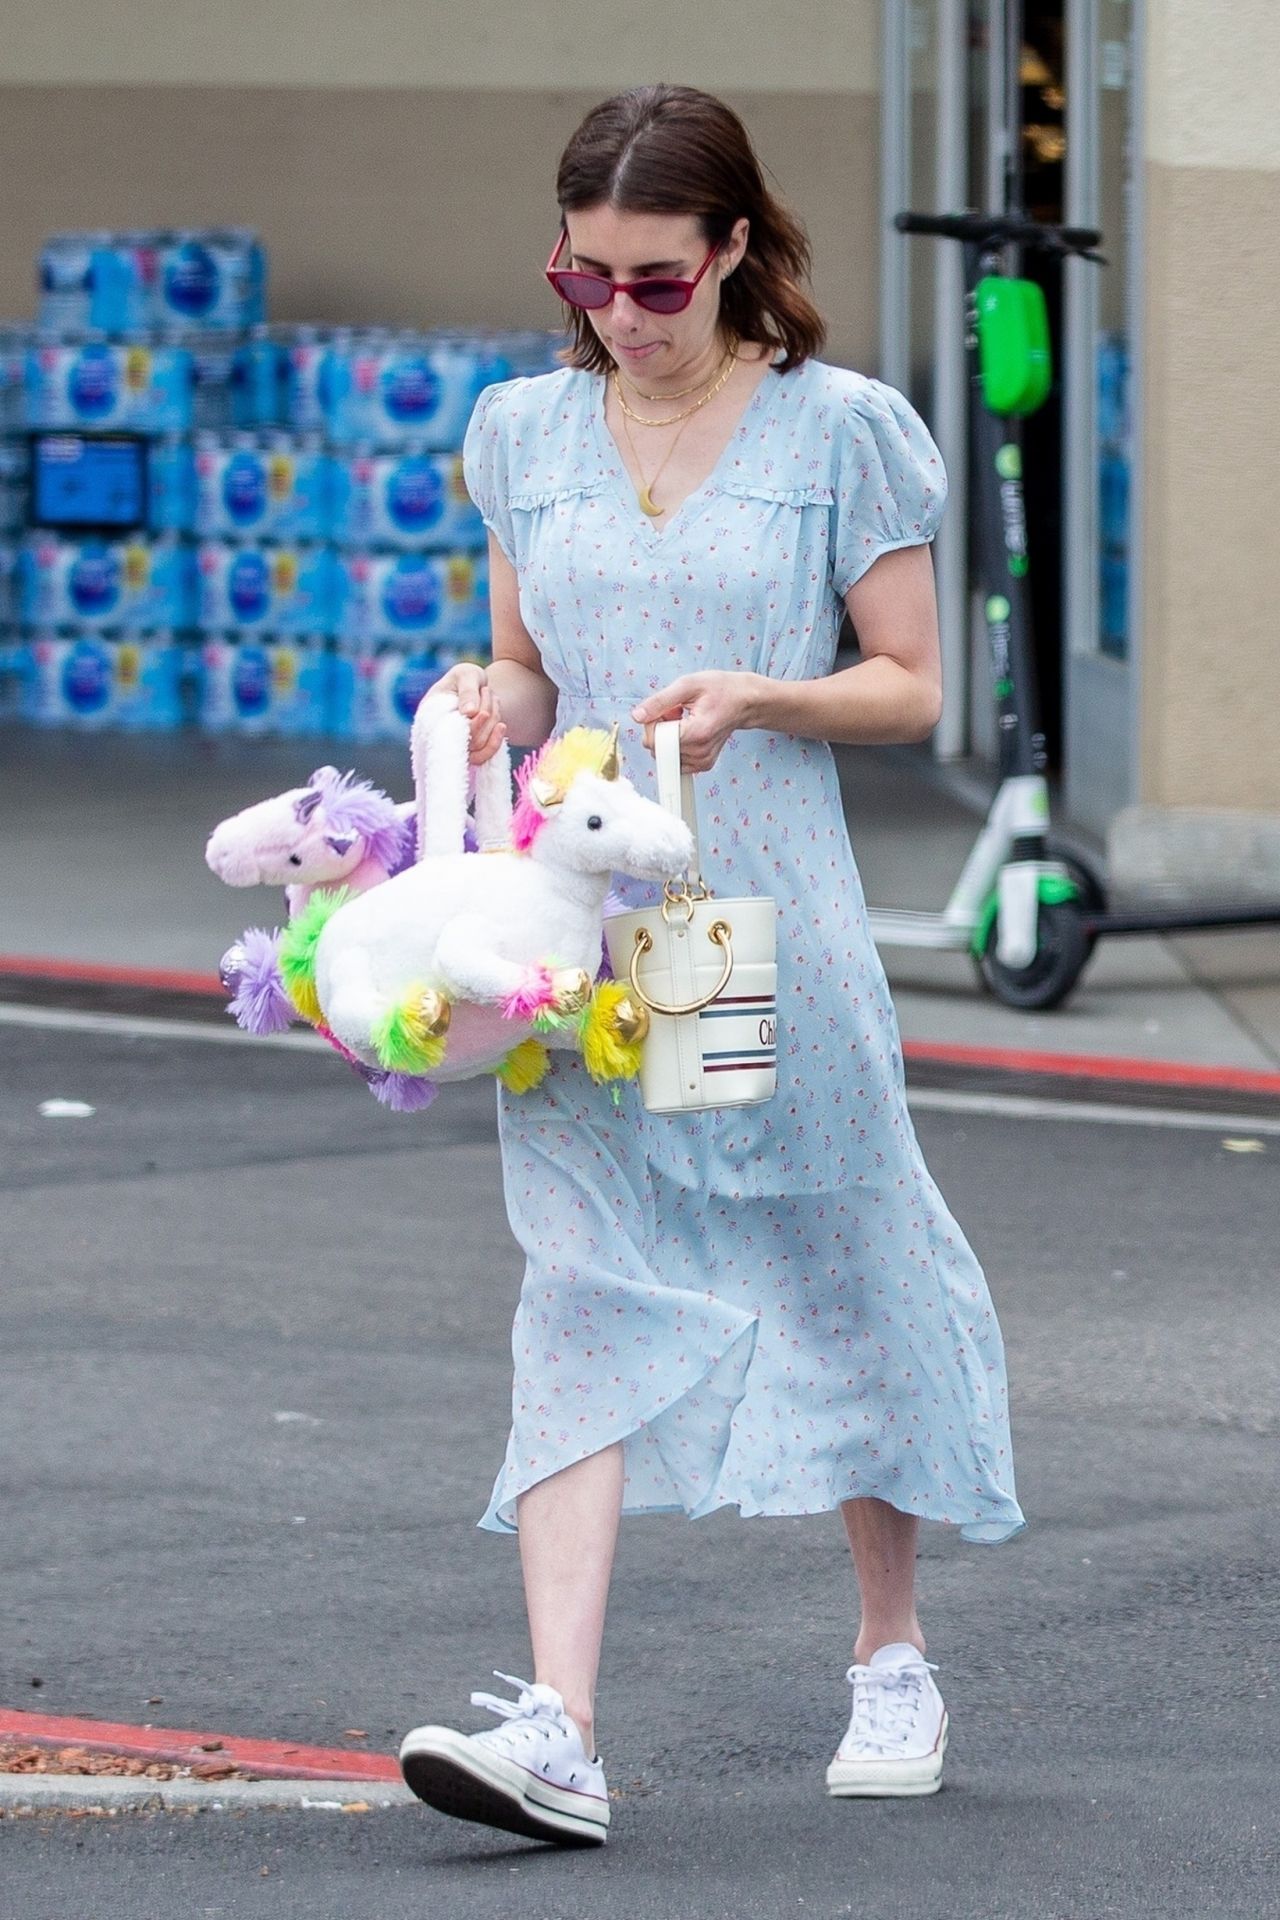 emma-roberts-shopping-on-easter-in-los-angeles-04-21-2019-3.jpg